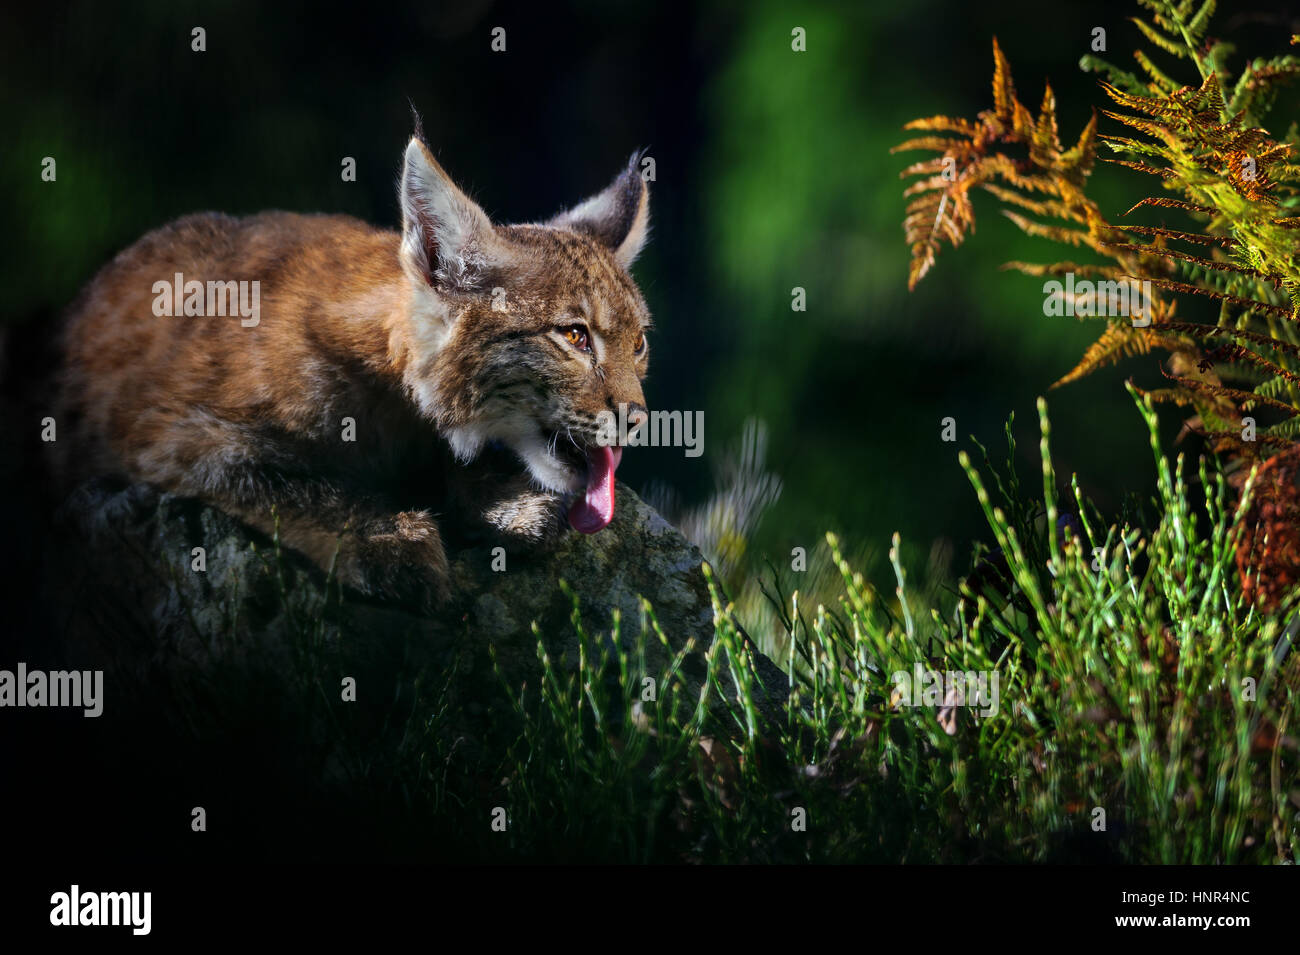 Licking eurasian lynx in forest with fern and colorful grass Stock Photo